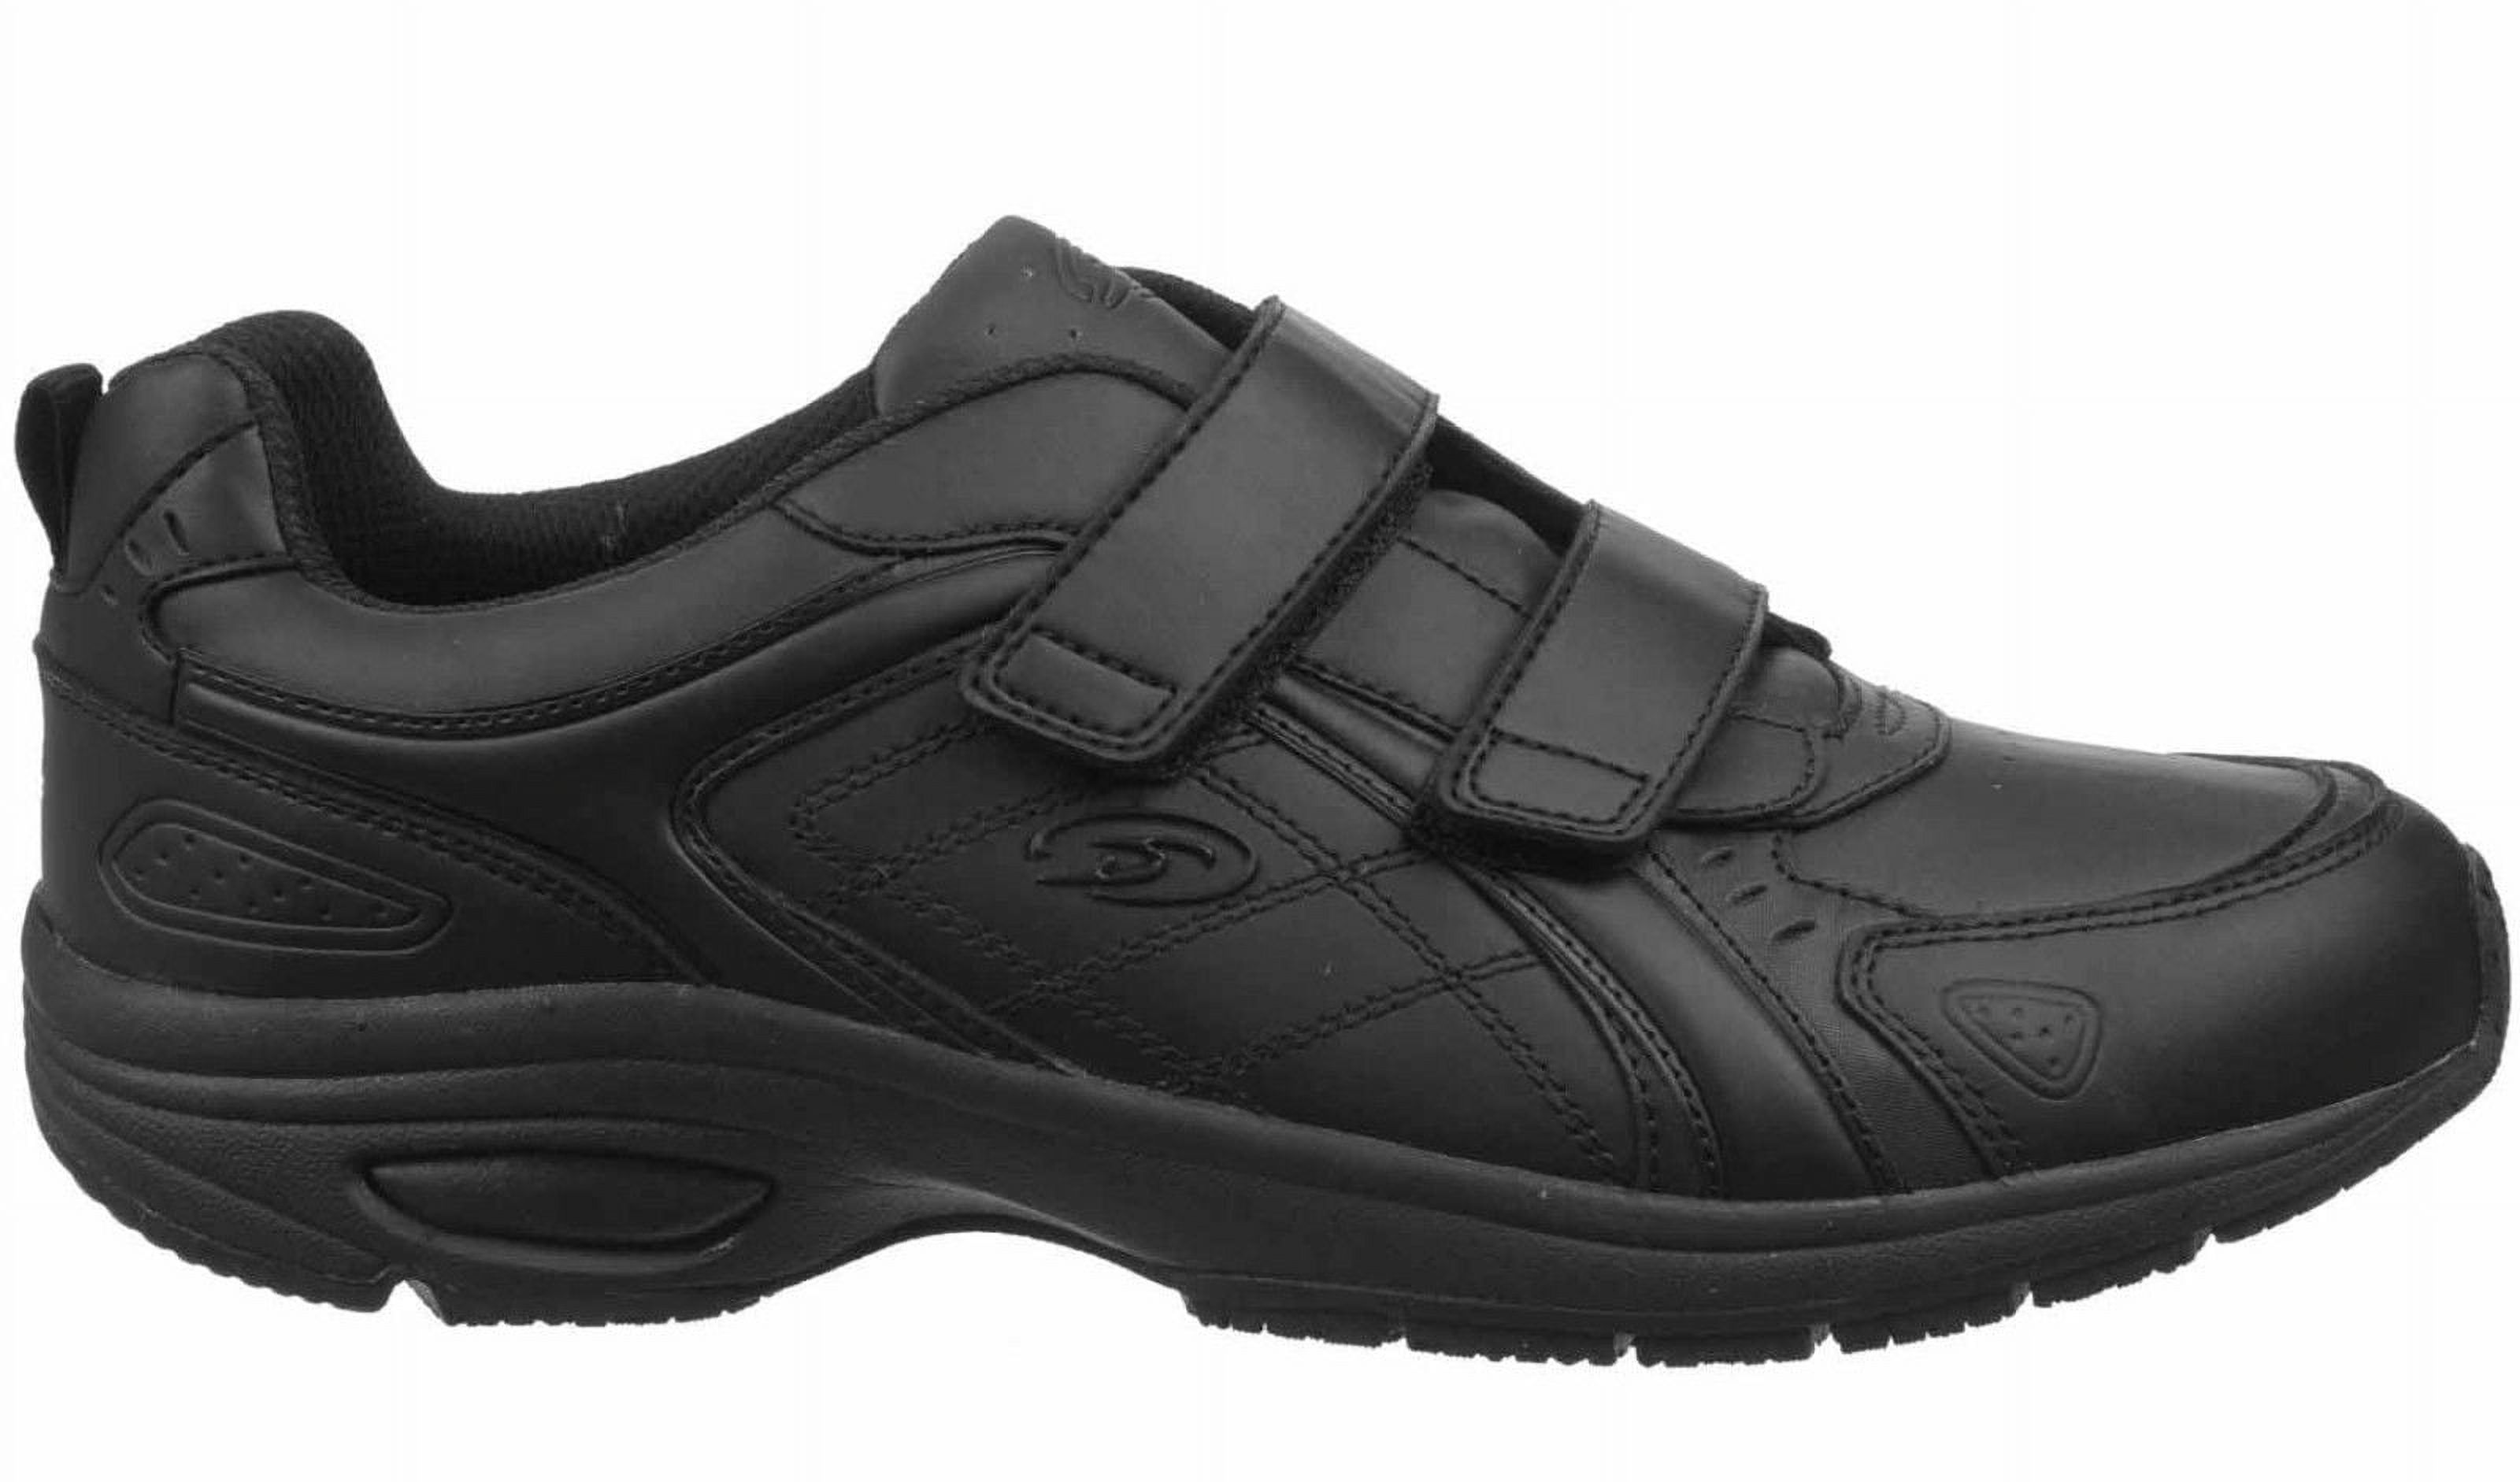 Dr. Scholl's Men's Brisk Sneakers (Wide Width Available) - image 1 of 5